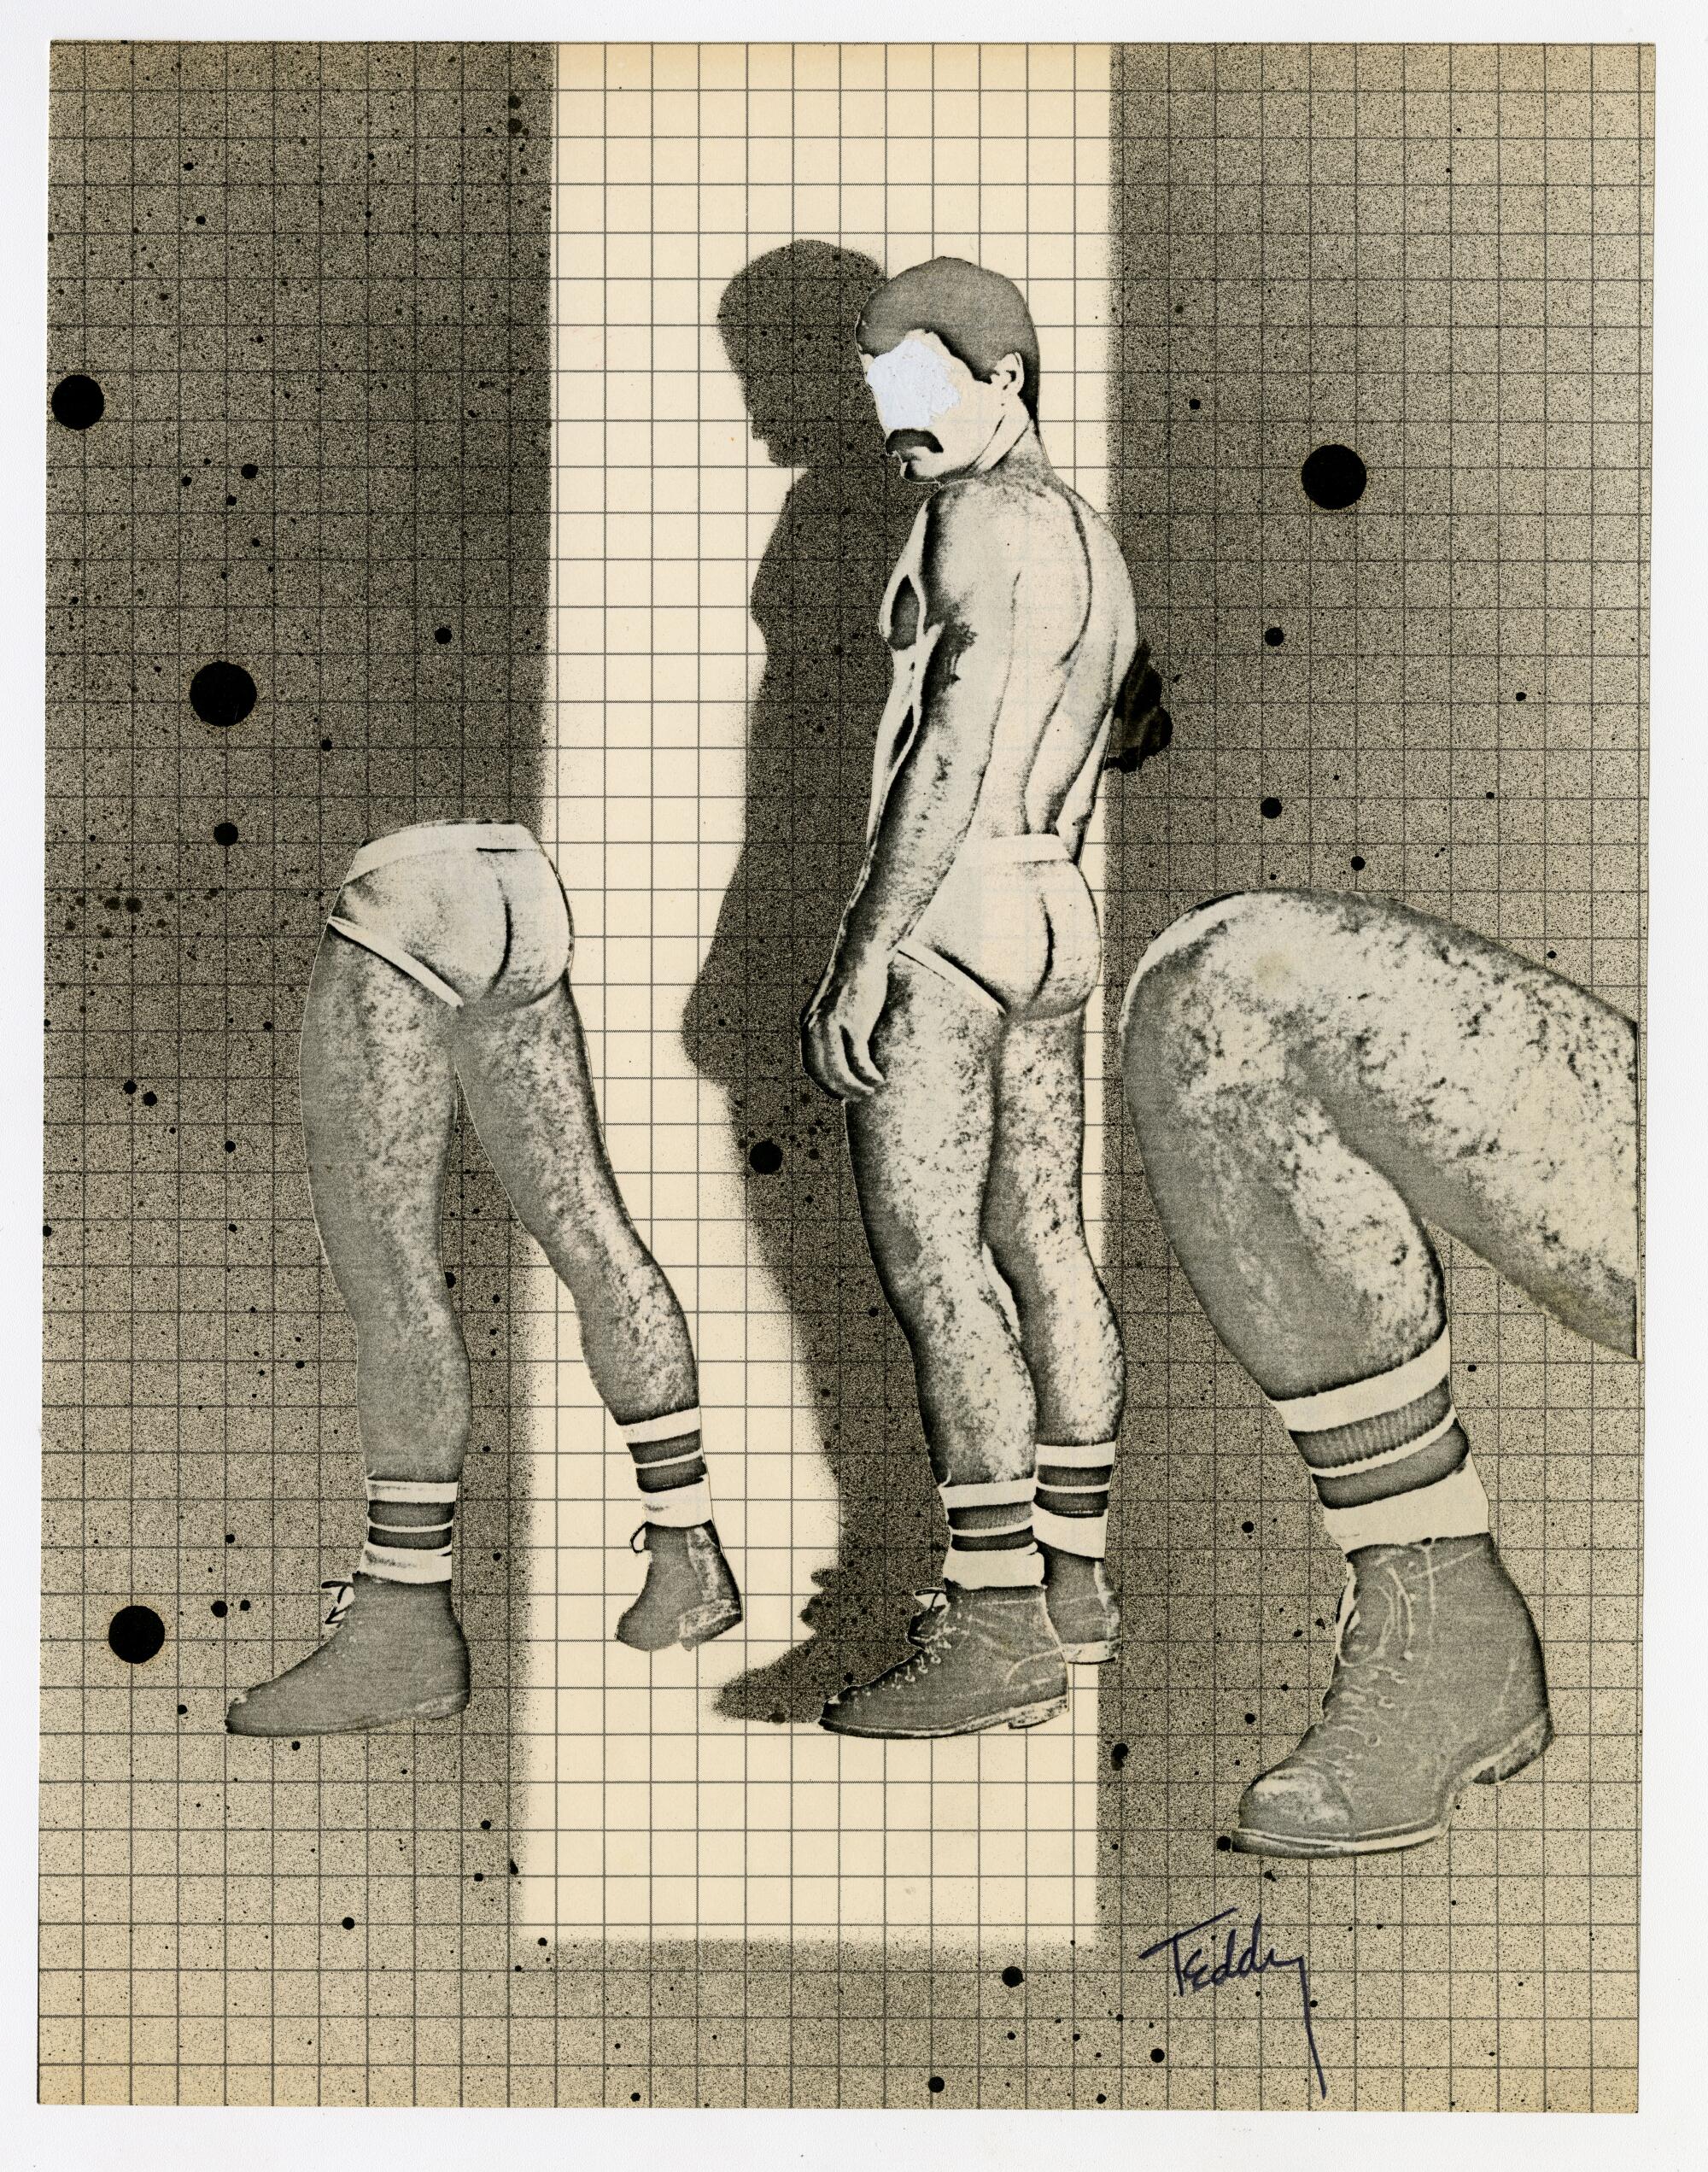 A faceless, mustachioed man wearing tight white briefs and boots looks over his shoulder in a collage on graph paper.